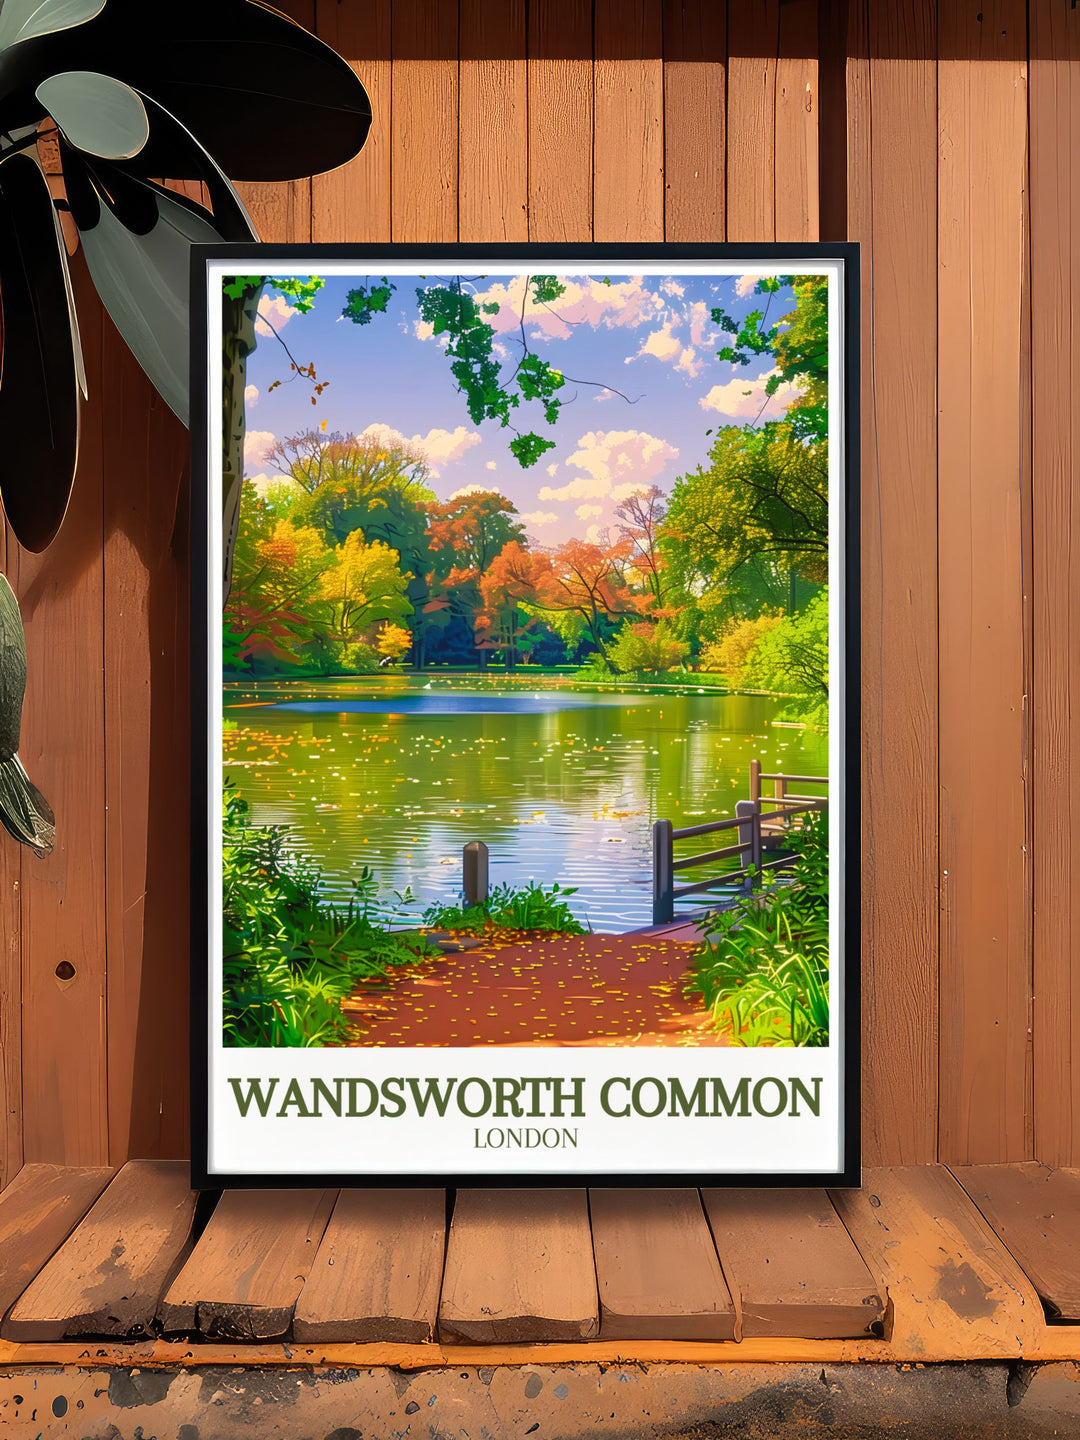 Our Wandsworth Common poster is a must have for any art enthusiast. This vintage print captures the essence of Wandsworth Park and the iconic Wandsworth Windmill, making it a timeless addition to your decor.